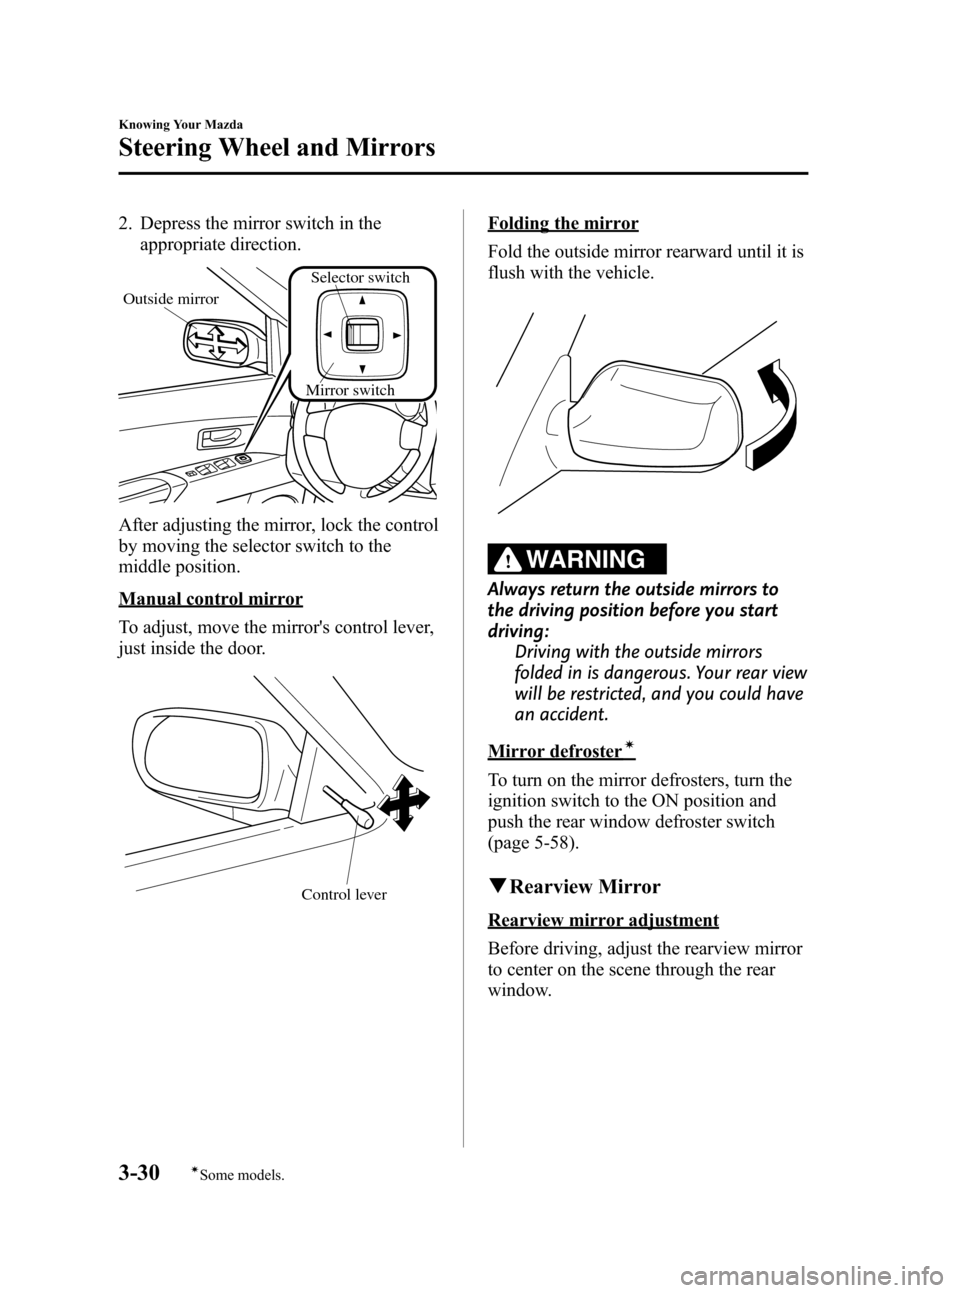 MAZDA MODEL 3 HATCHBACK 2008  Owners Manual (in English) Black plate (102,1)
2. Depress the mirror switch in the
appropriate direction.
Mirror switch
Outside mirror
Selector switch
After adjusting the mirror, lock the control
by moving the selector switch t